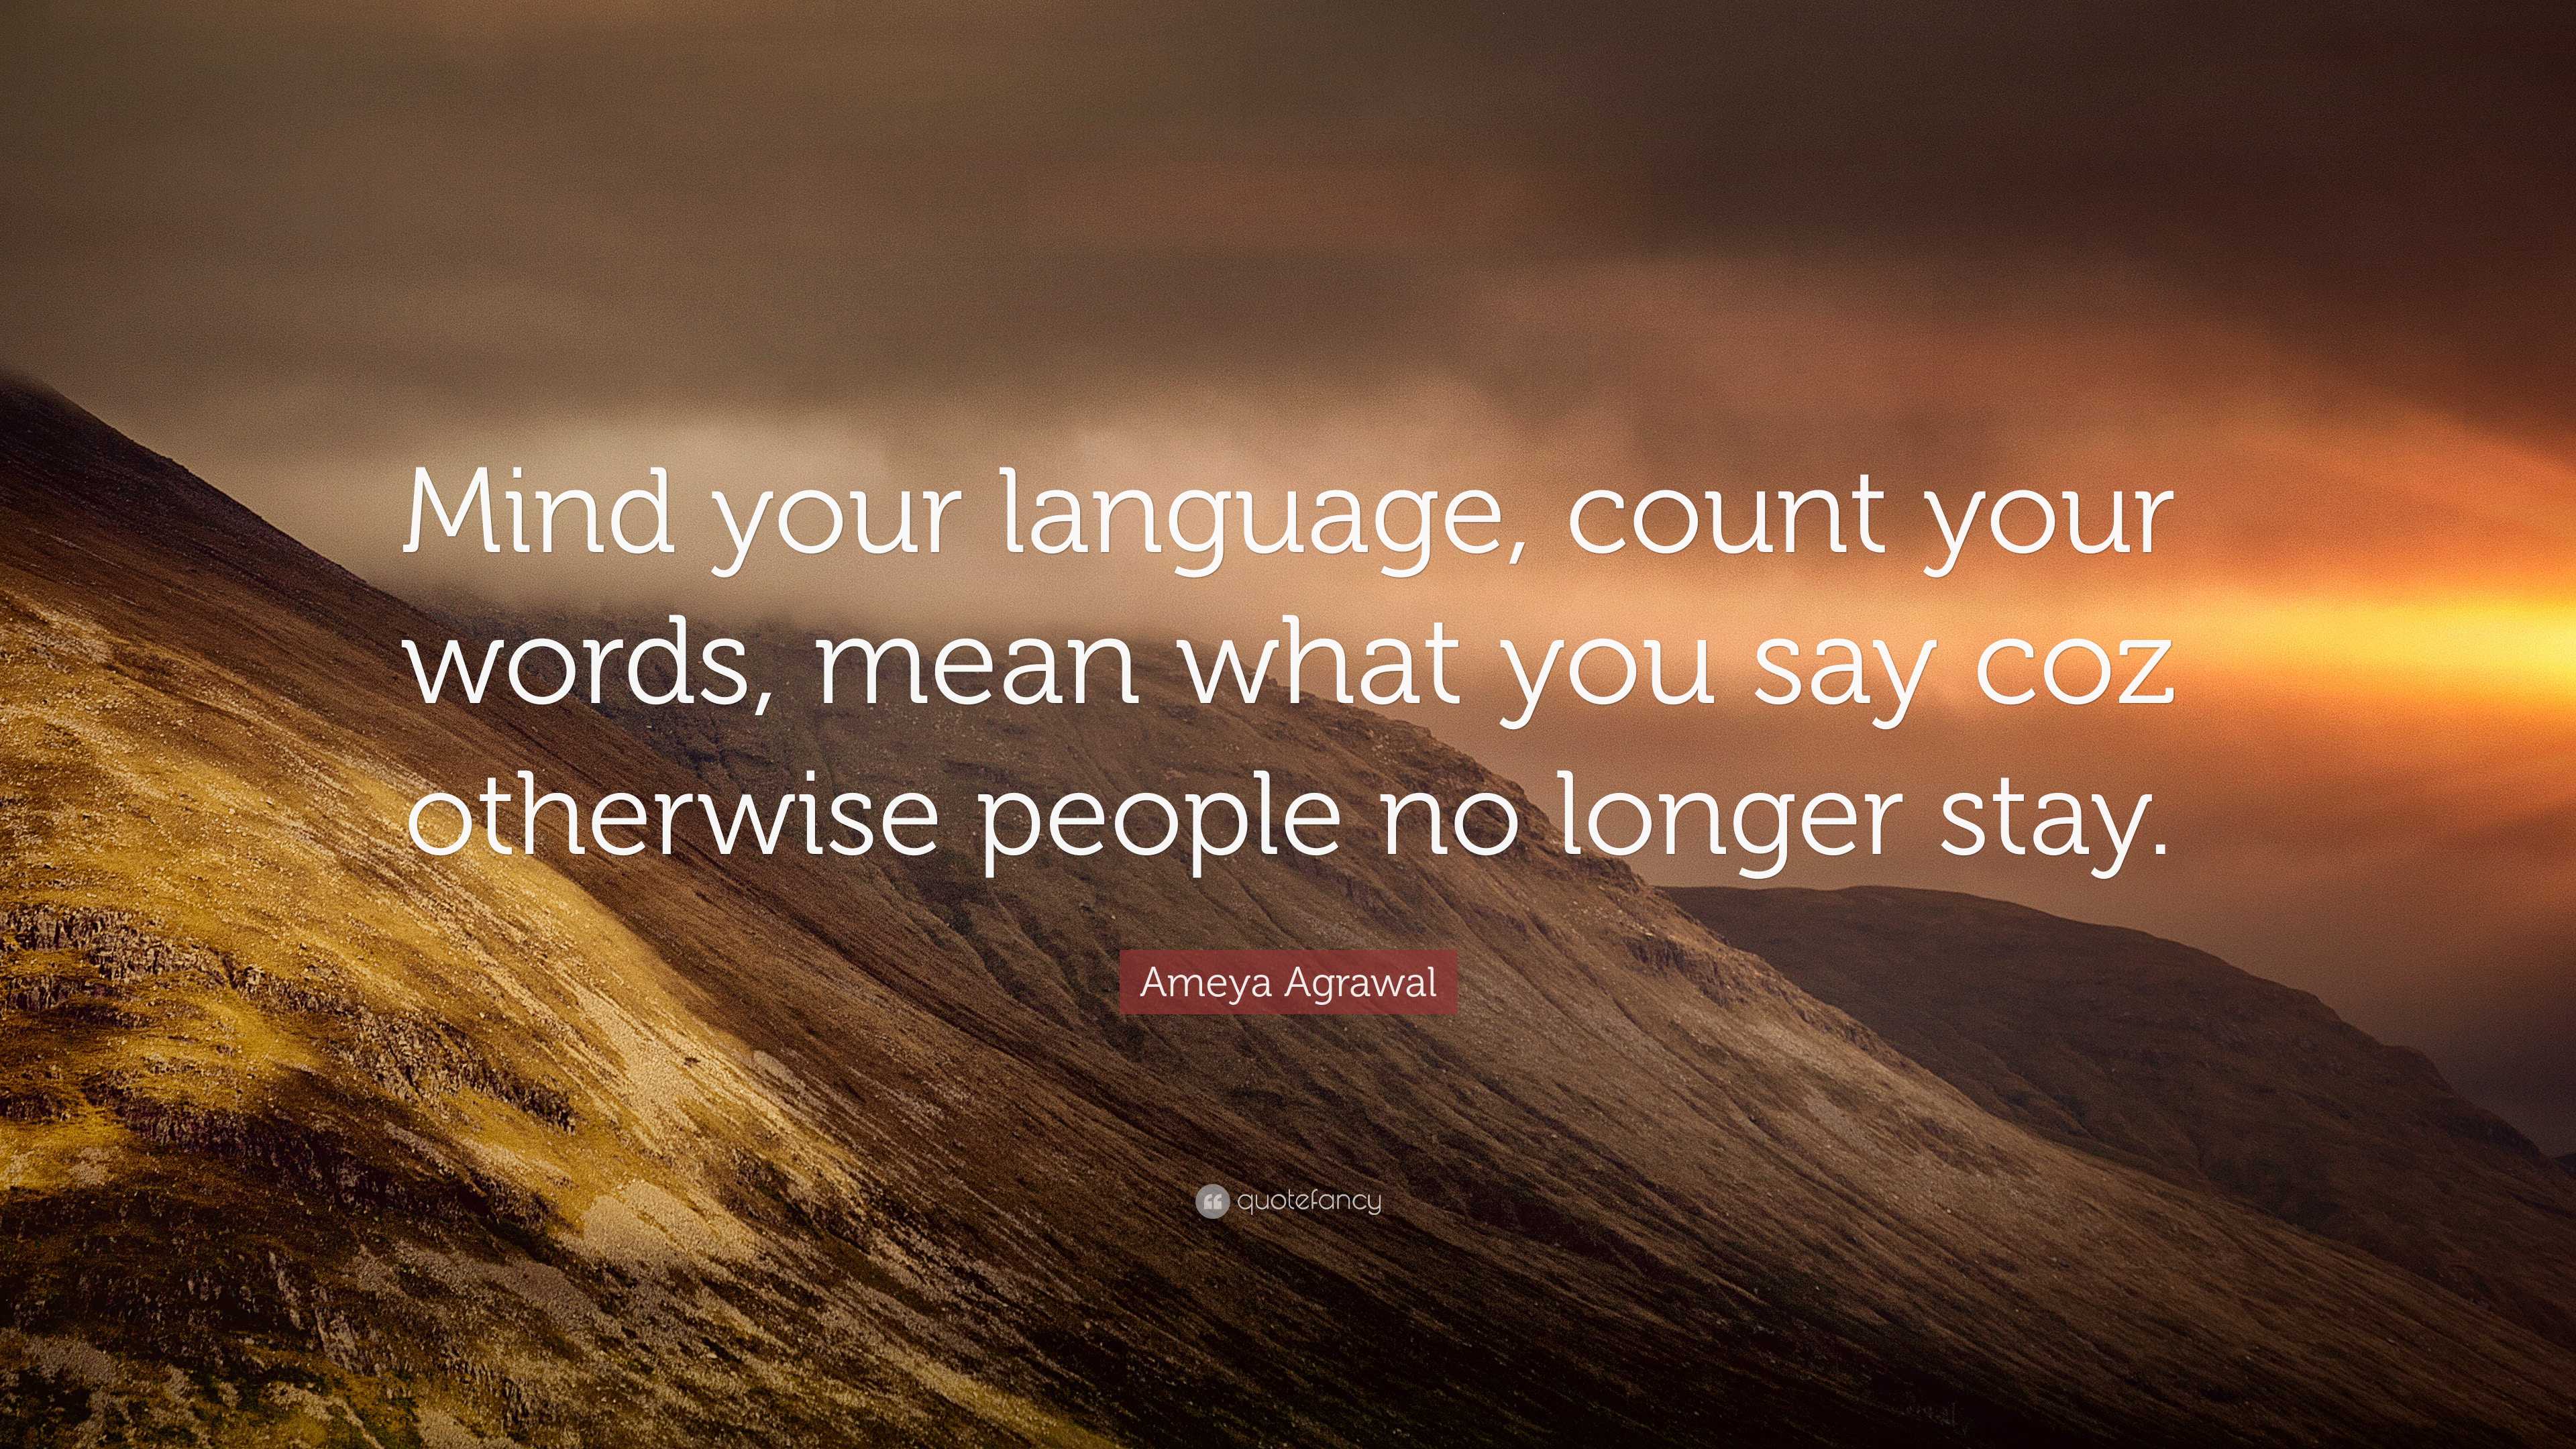 Ameya Agrawal Quote: “Mind your language, count your words, mean what you  say coz otherwise people